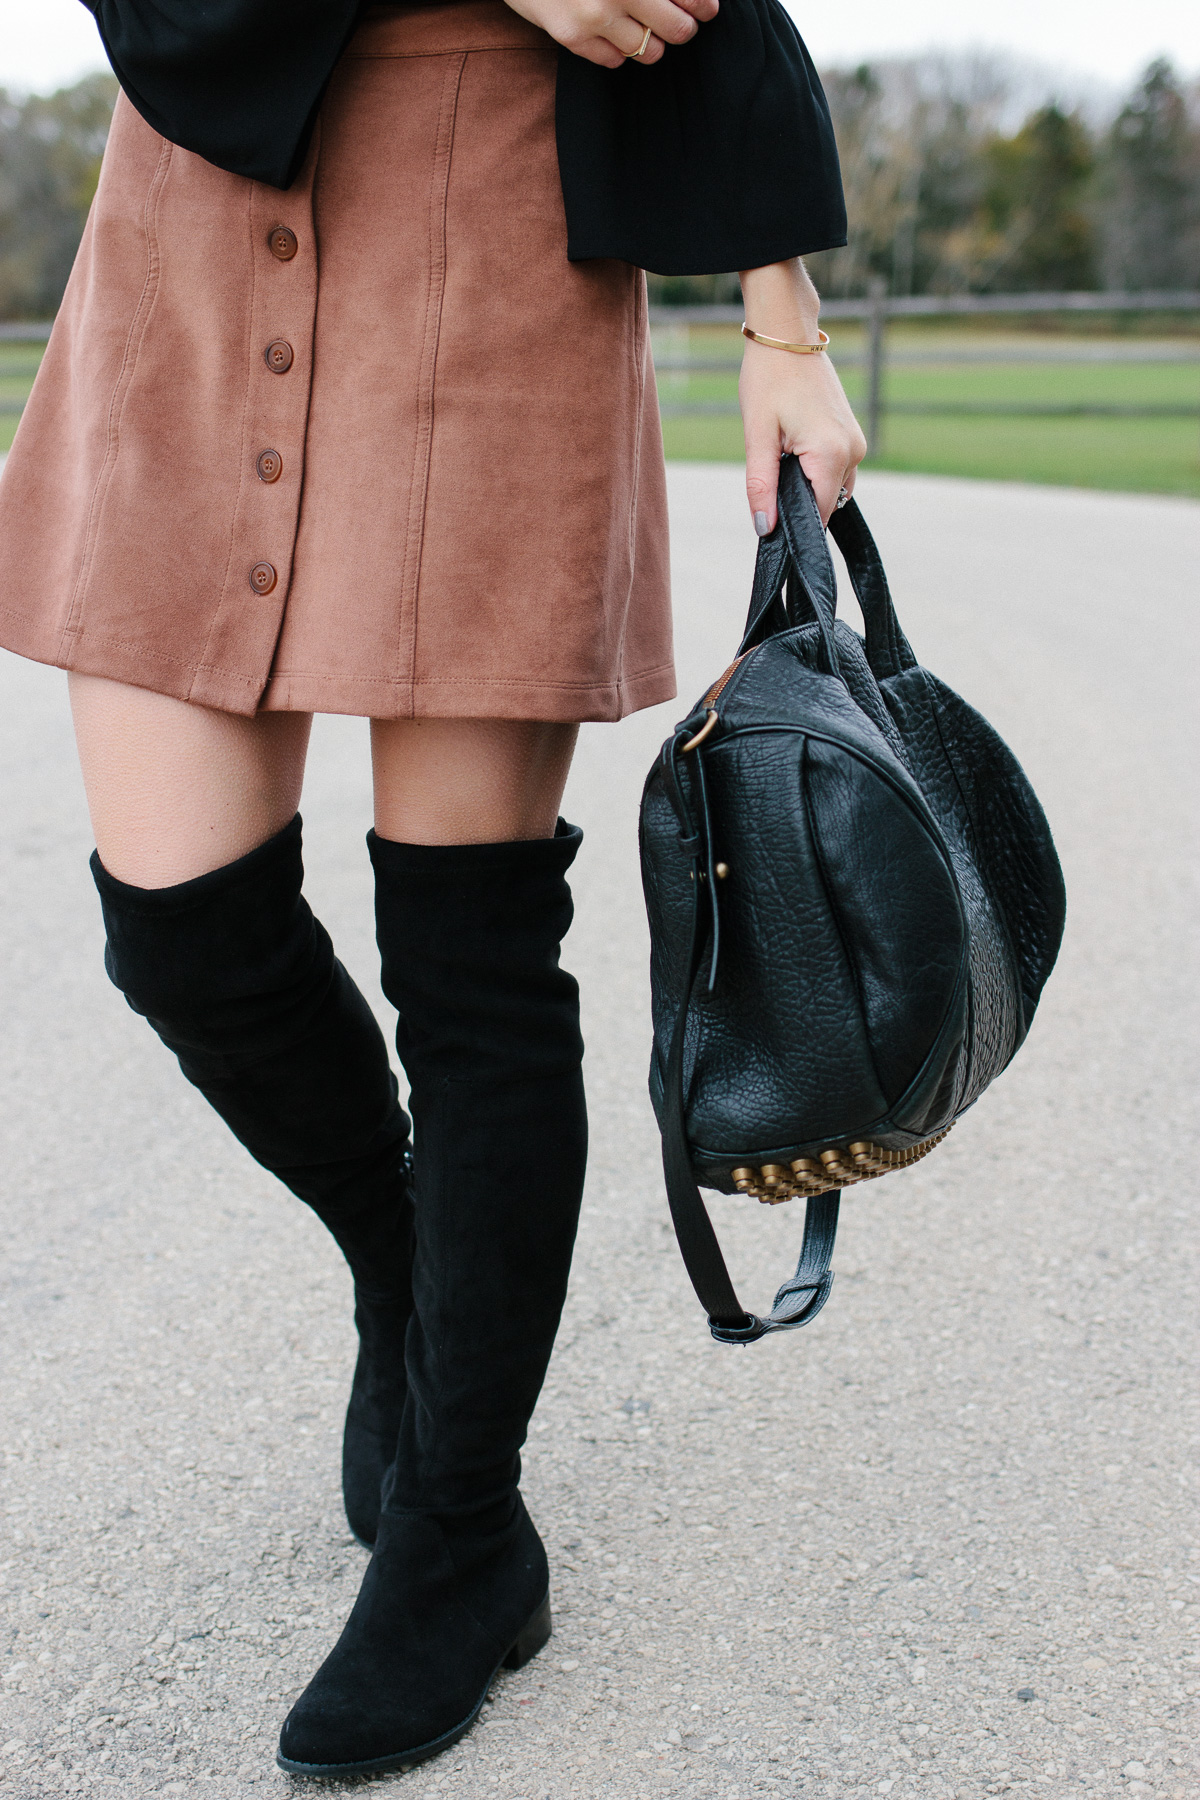 Target Over the Knee Boots Under $50